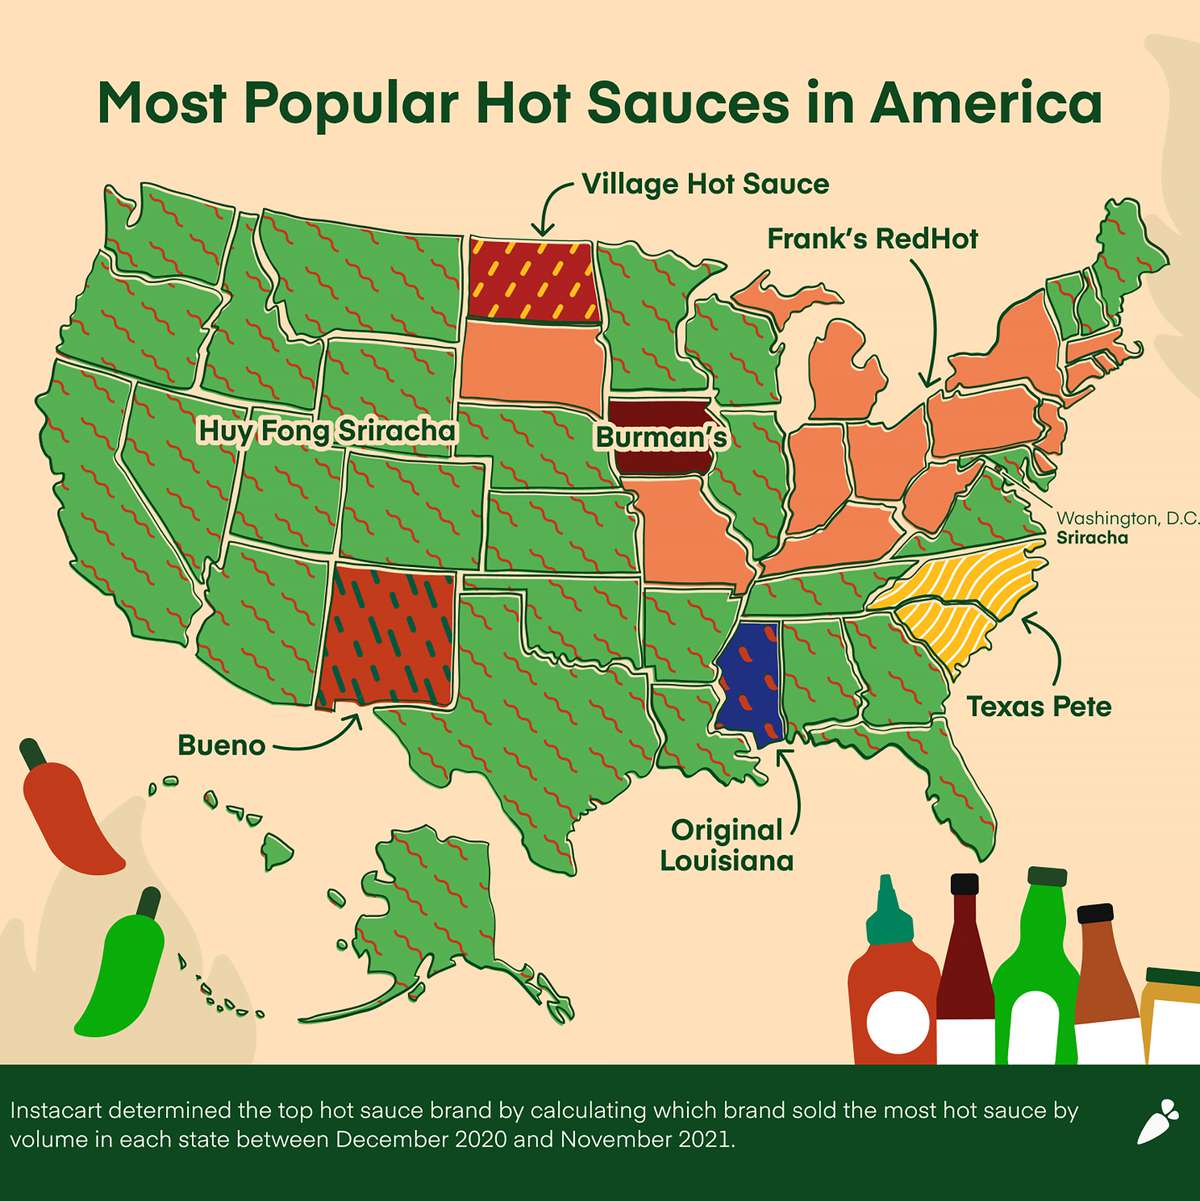 An infographic map showing the most popular hot sauce brands by state